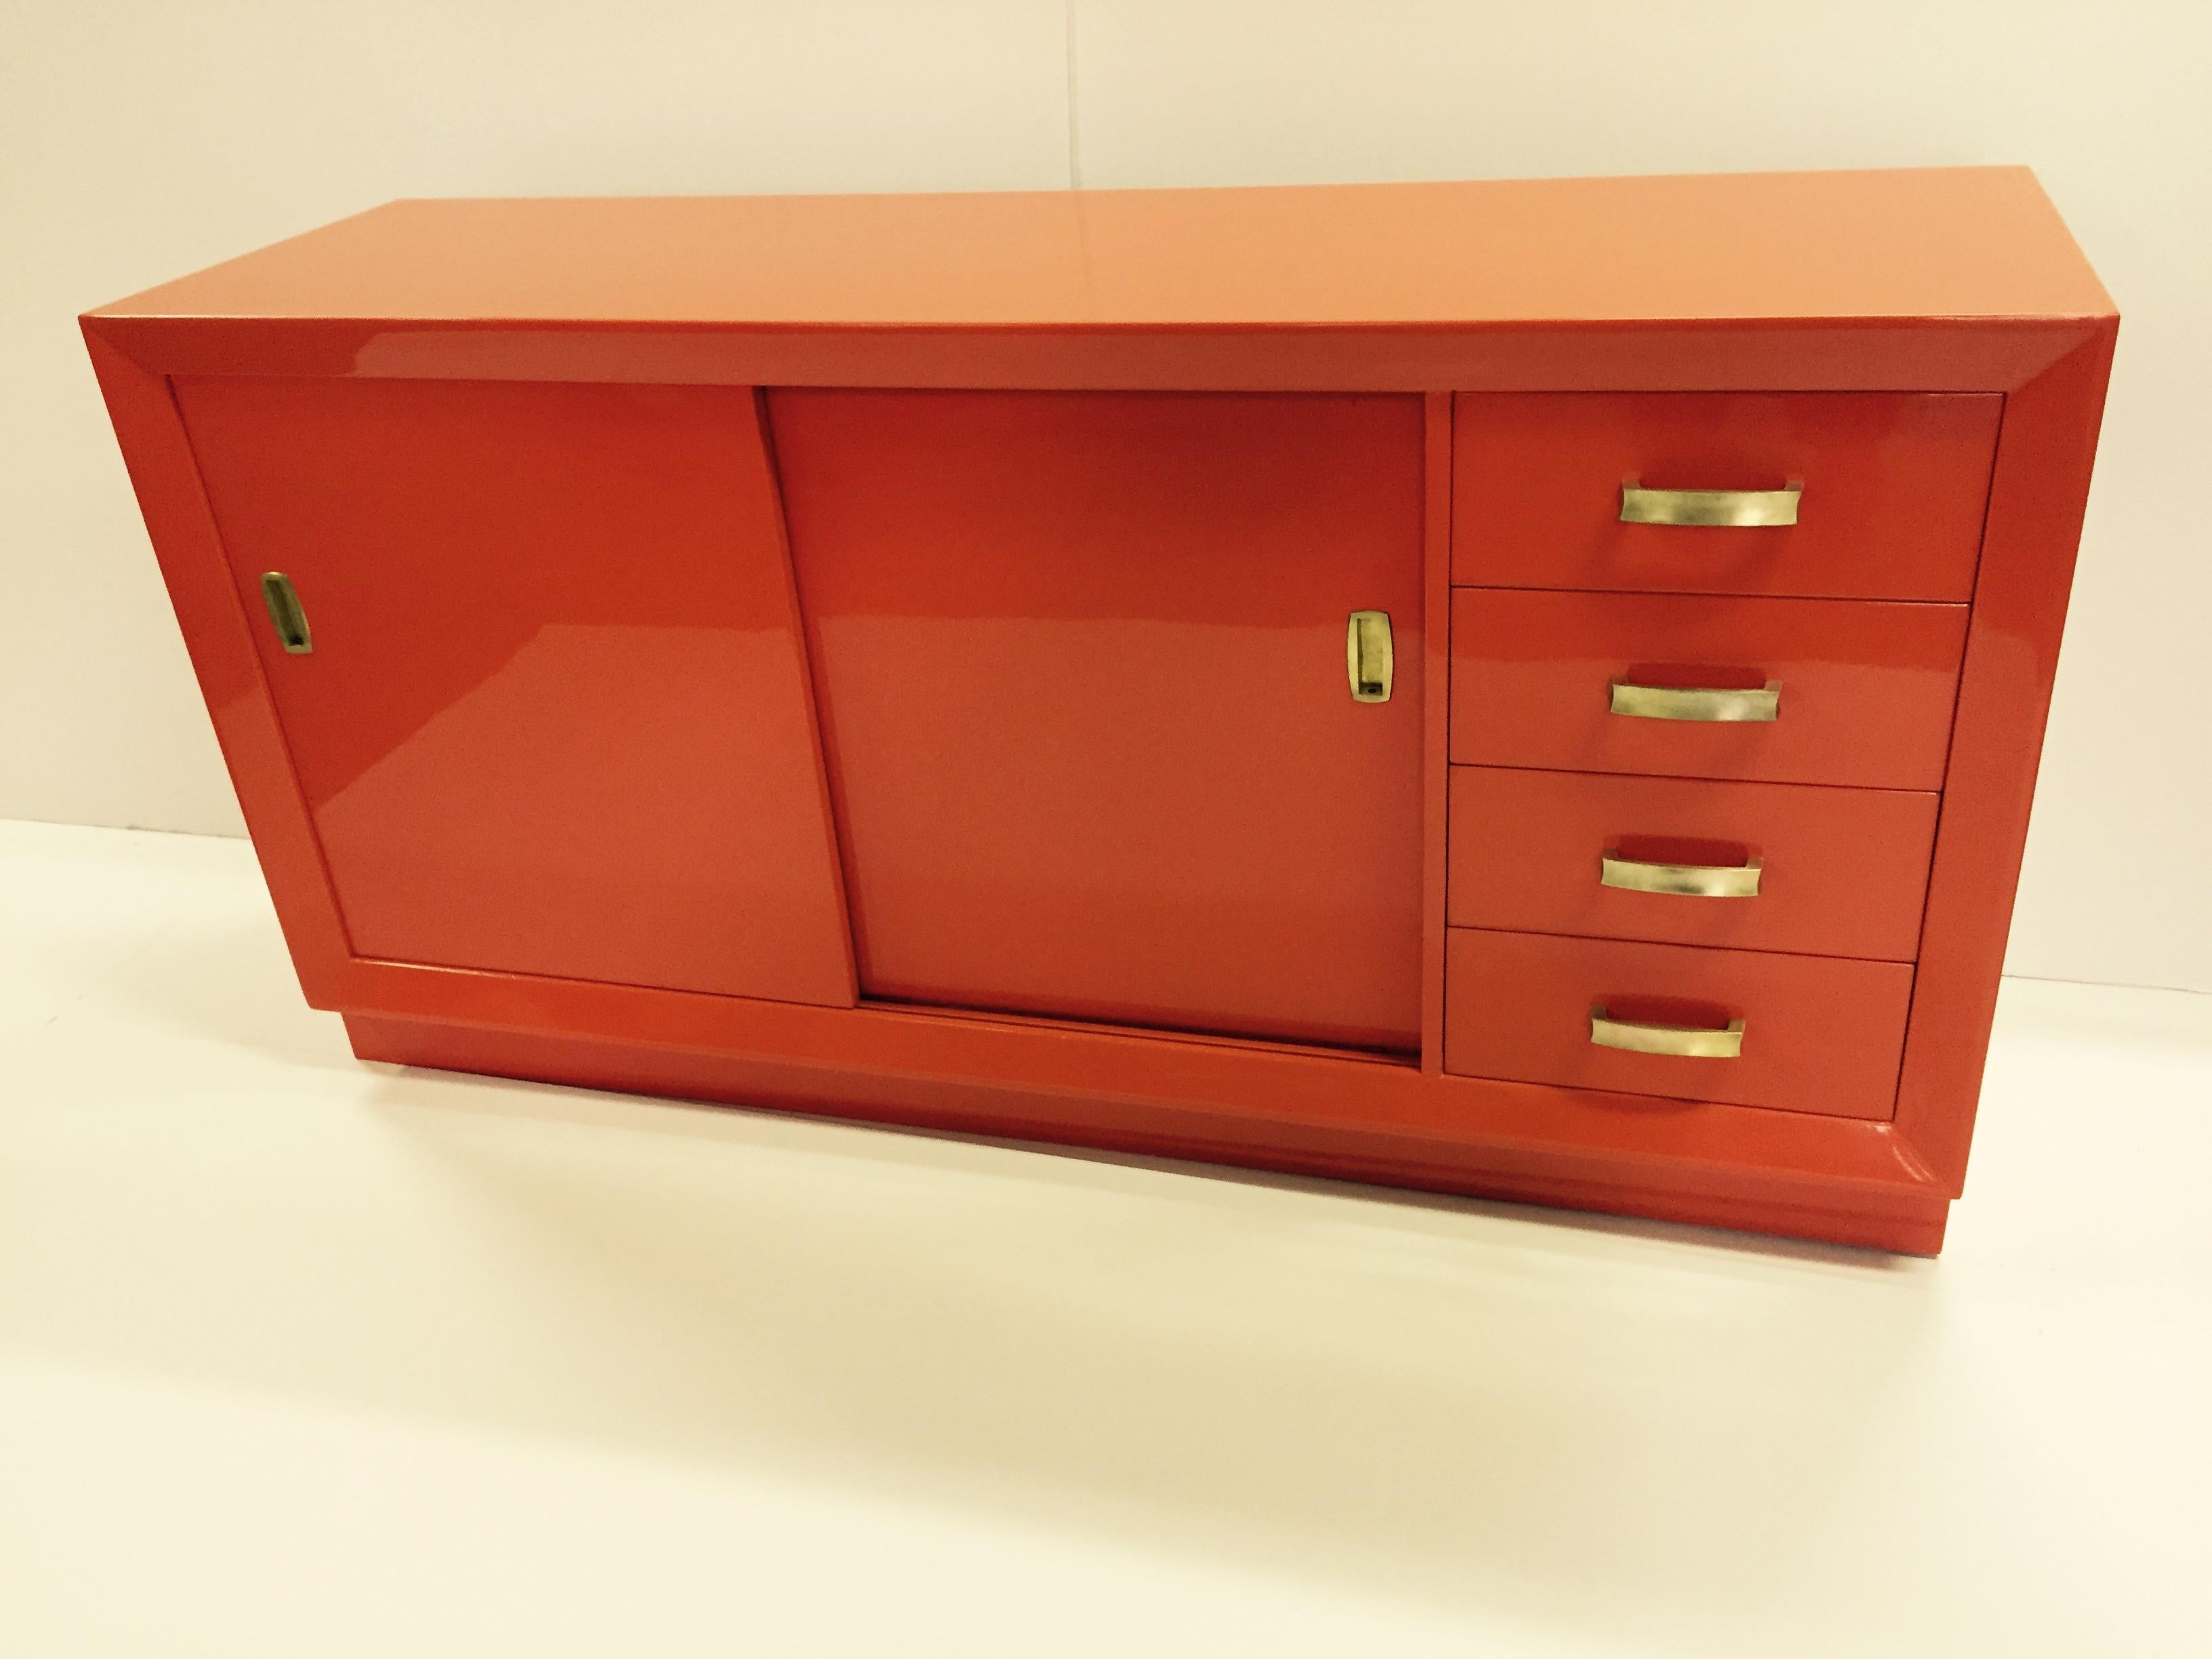 Orange Mid-Century Modern Dressers Attributed to John Widdicomb for John Stuart In Good Condition For Sale In Bronx, NY